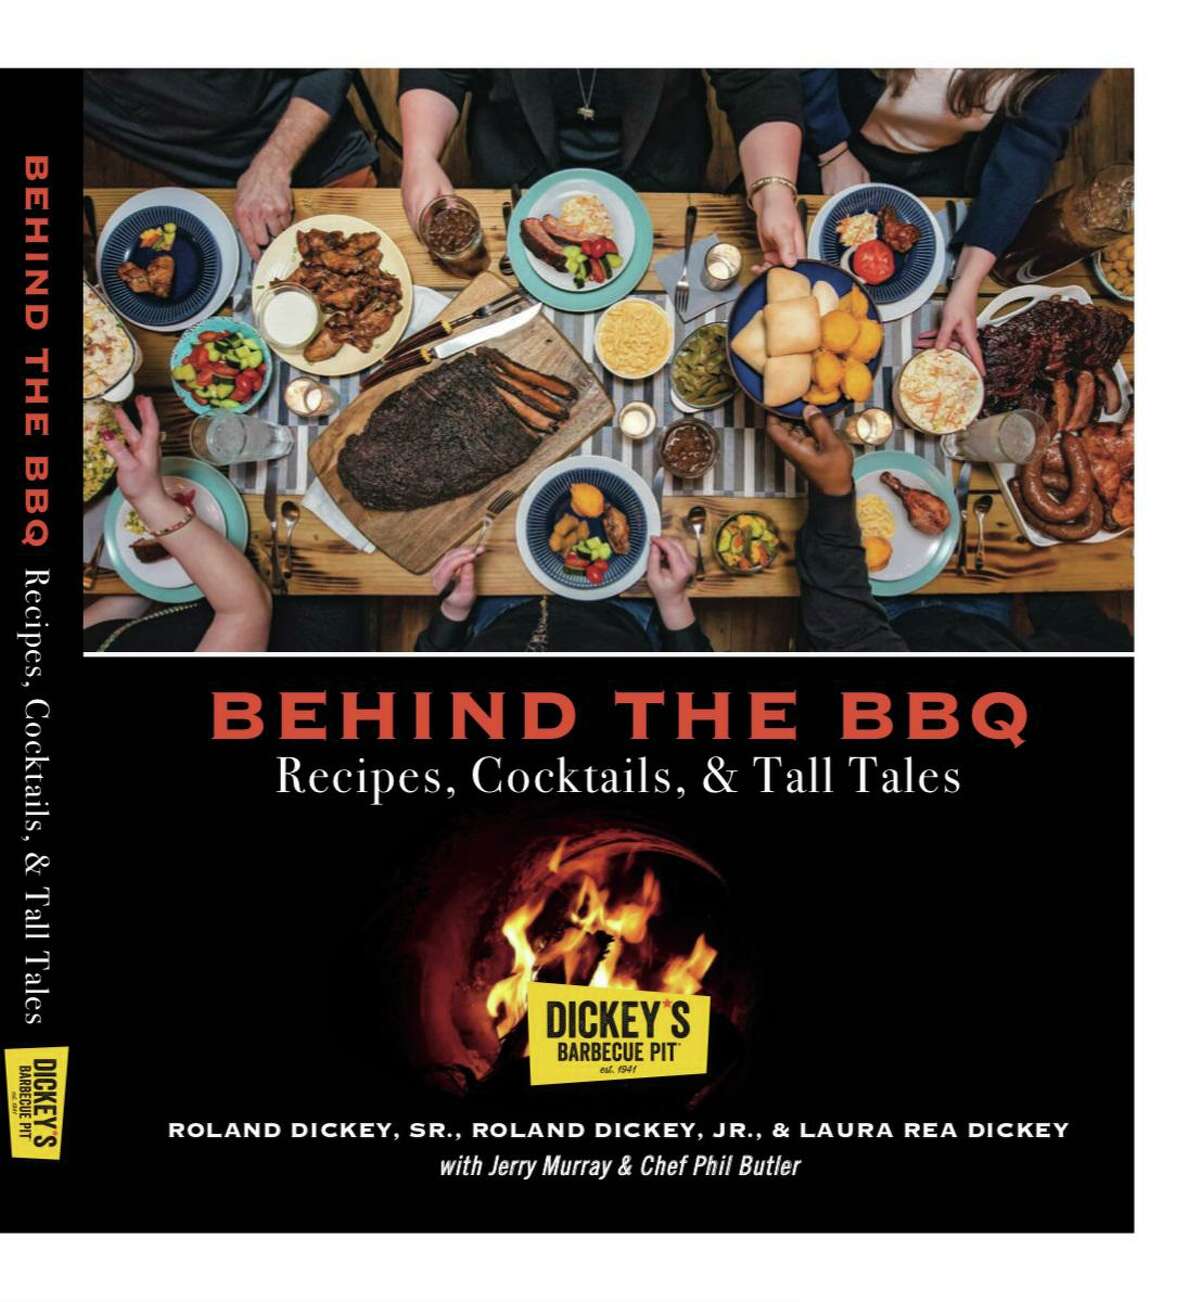 Cover of “Behind the BBQ: Recipes, Cocktails & Tall Tales” from Dickey’s Barbecue Pit.